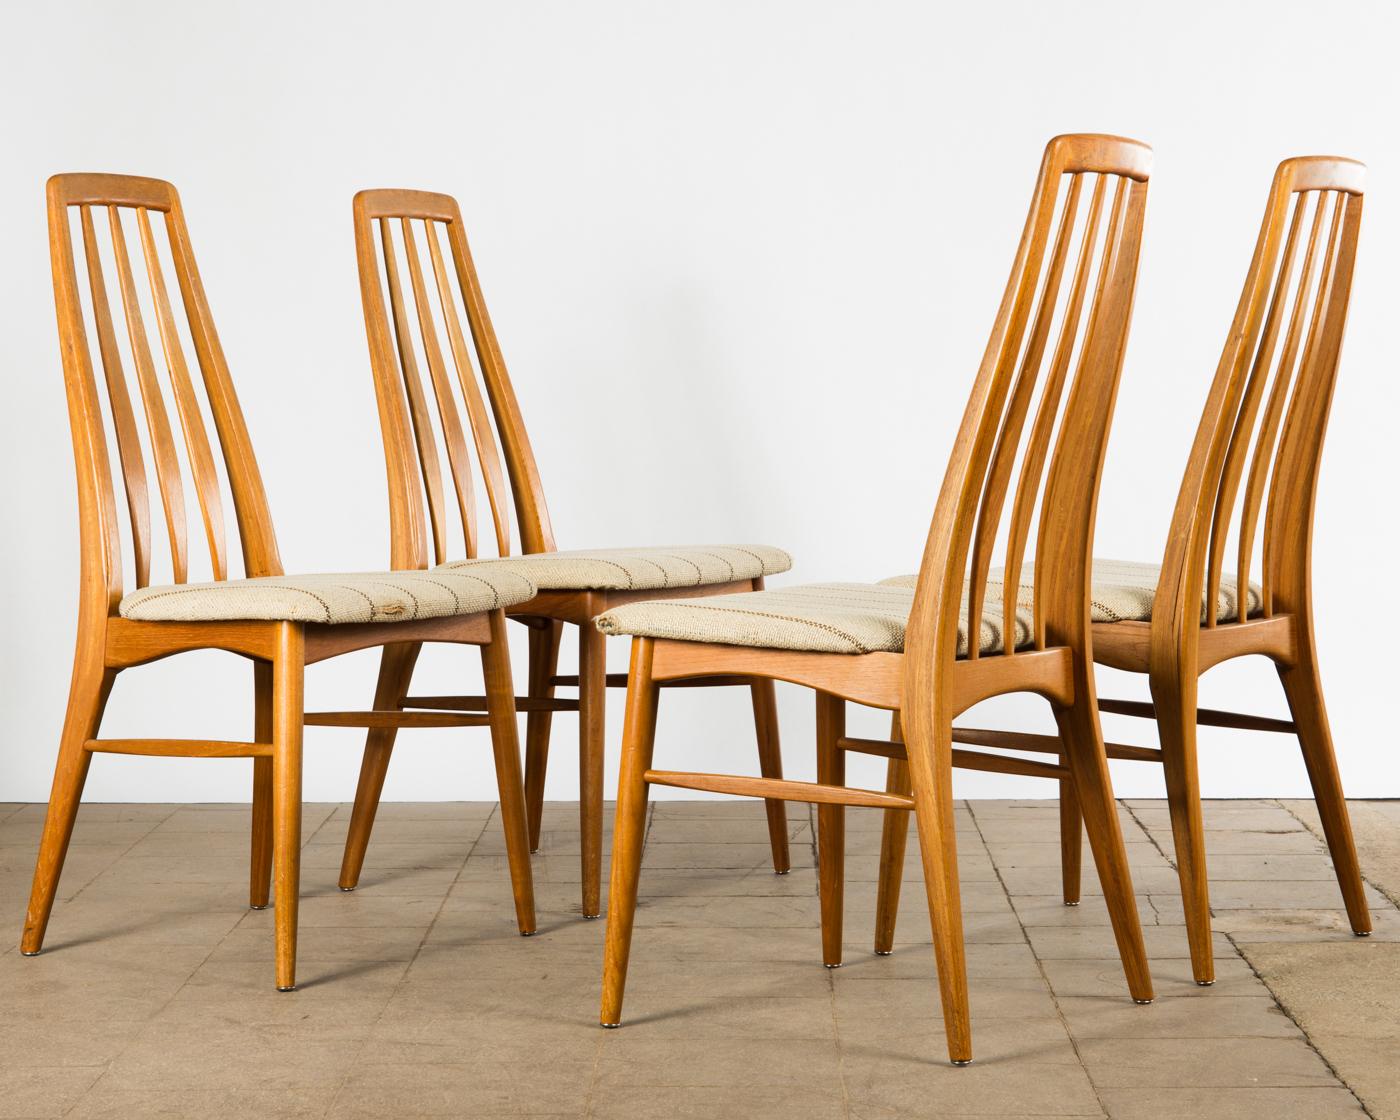 A set of 8 Eva dining chairs by Niels Koefoed for Koefoed's Hornslet, high backed with legs having side stretchers, four chair seats covered in green wool, four covered in beige wool with narrow stripe, manufacturer's stamp.